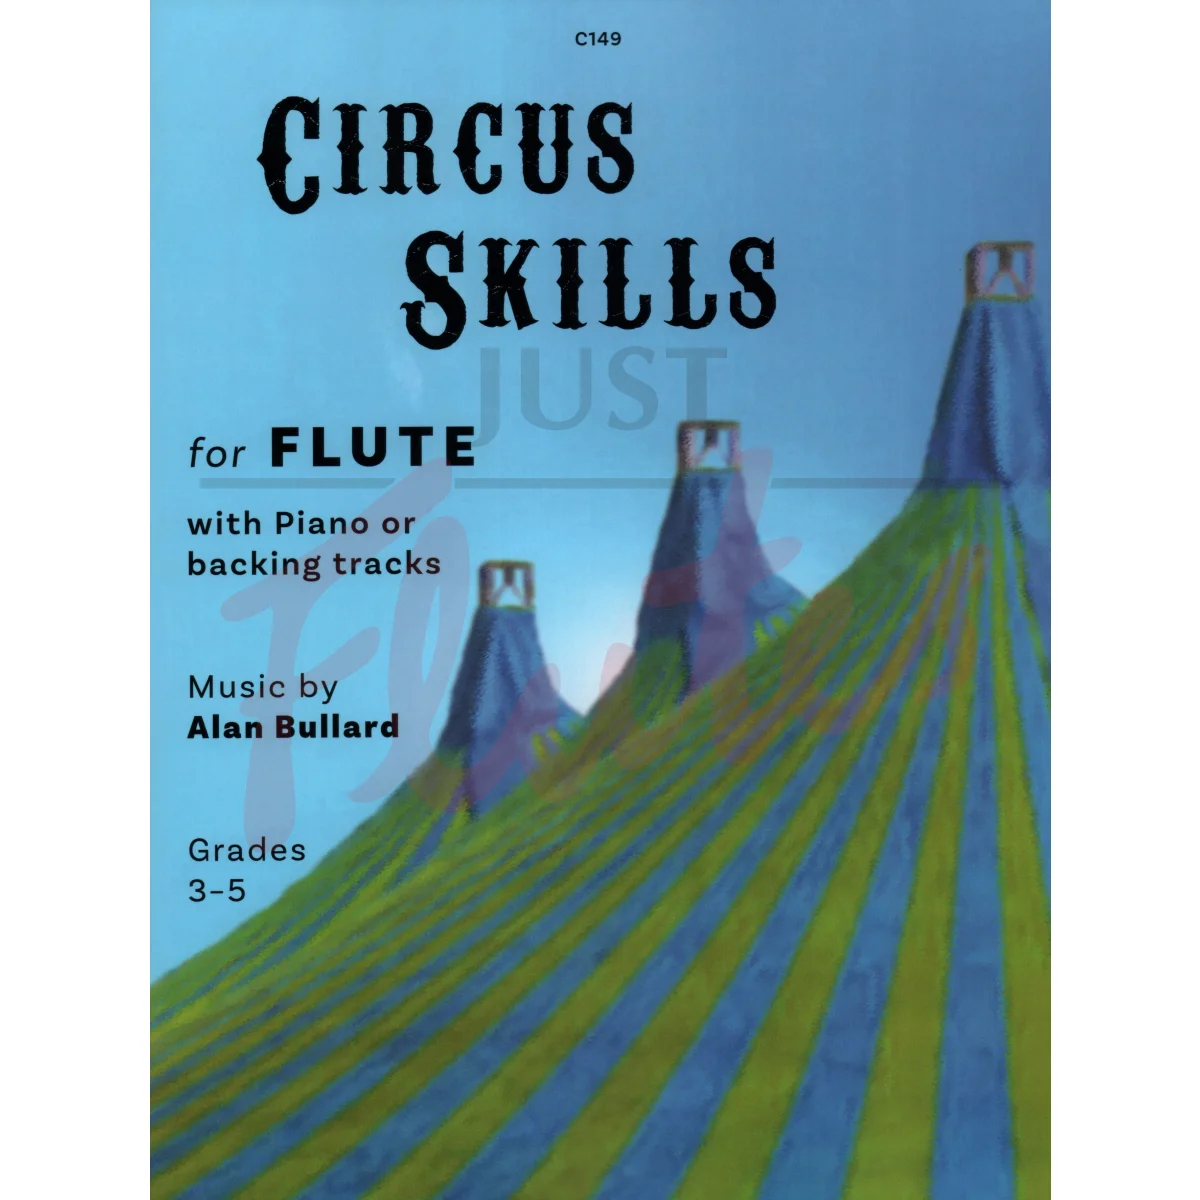 Circus Skills for Flute and Piano